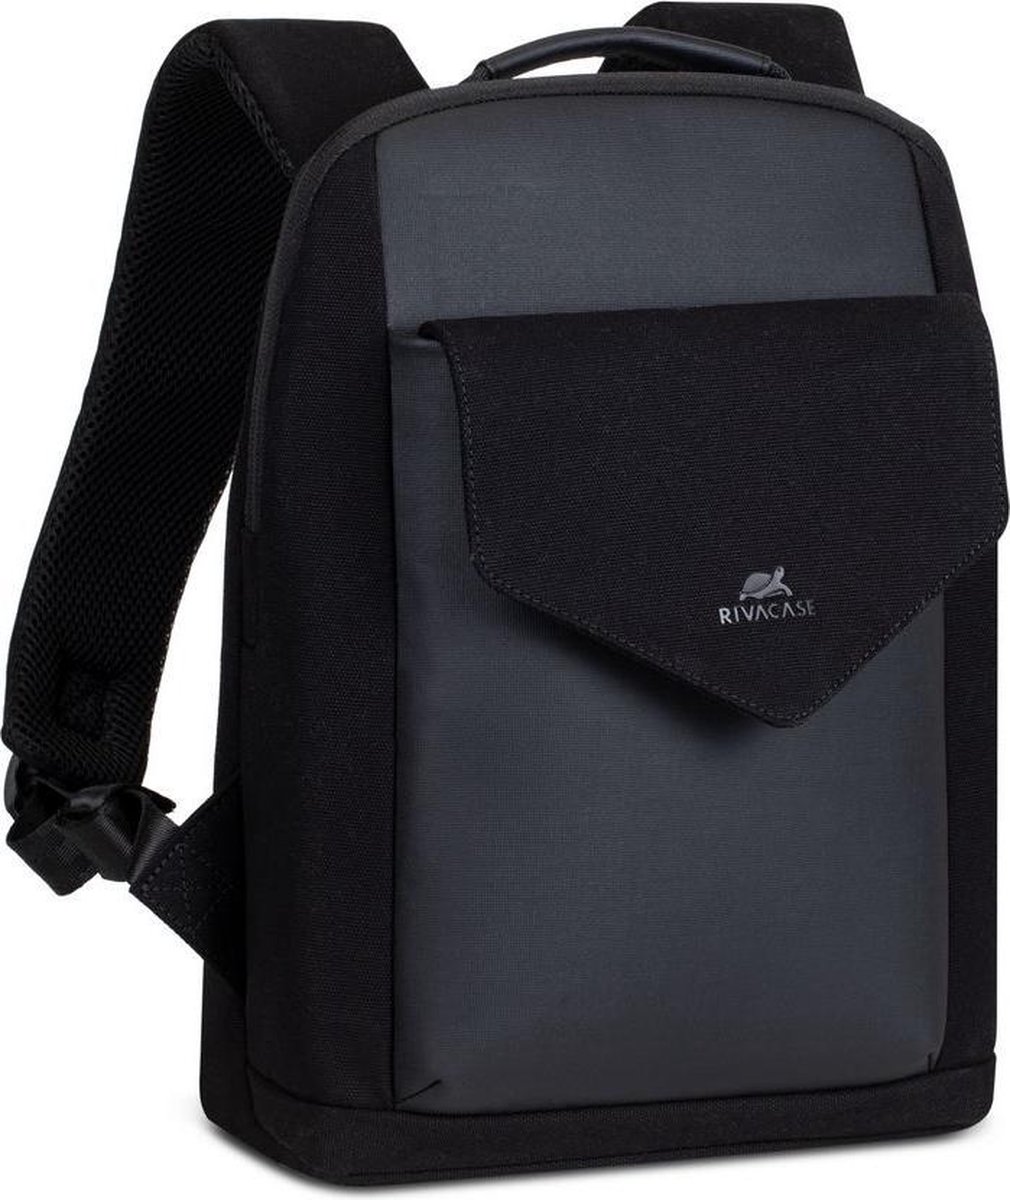 RIVACASE 8521 black canvas urban backpack